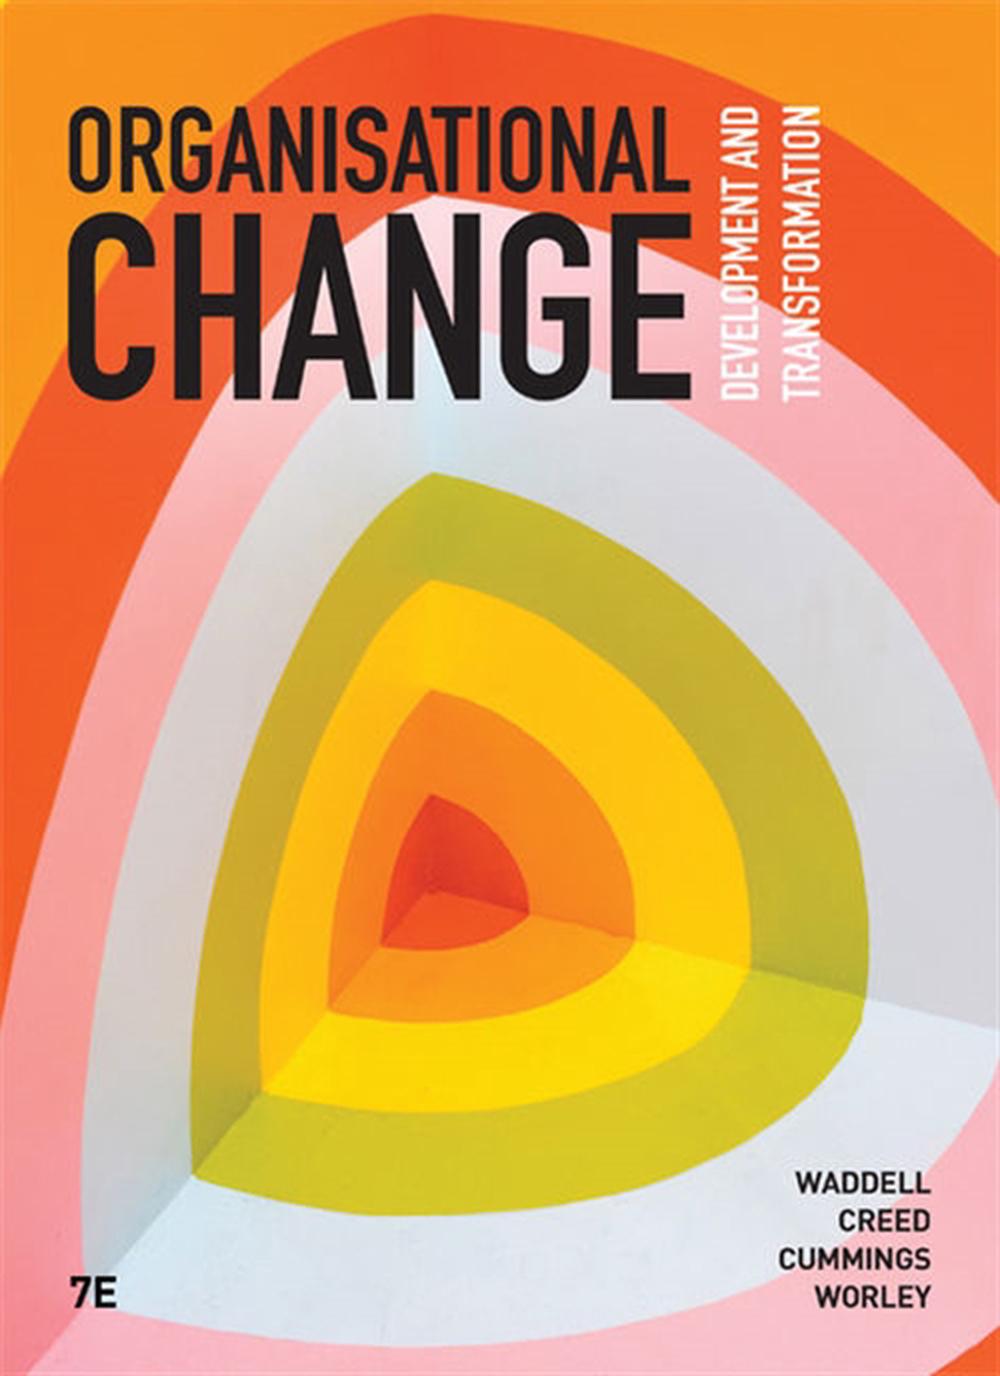 online　Paperback,　Waddell,　9780170424448　The　Organisational　Edition　Dianne　Change,　at　Buy　7th　by　Nile